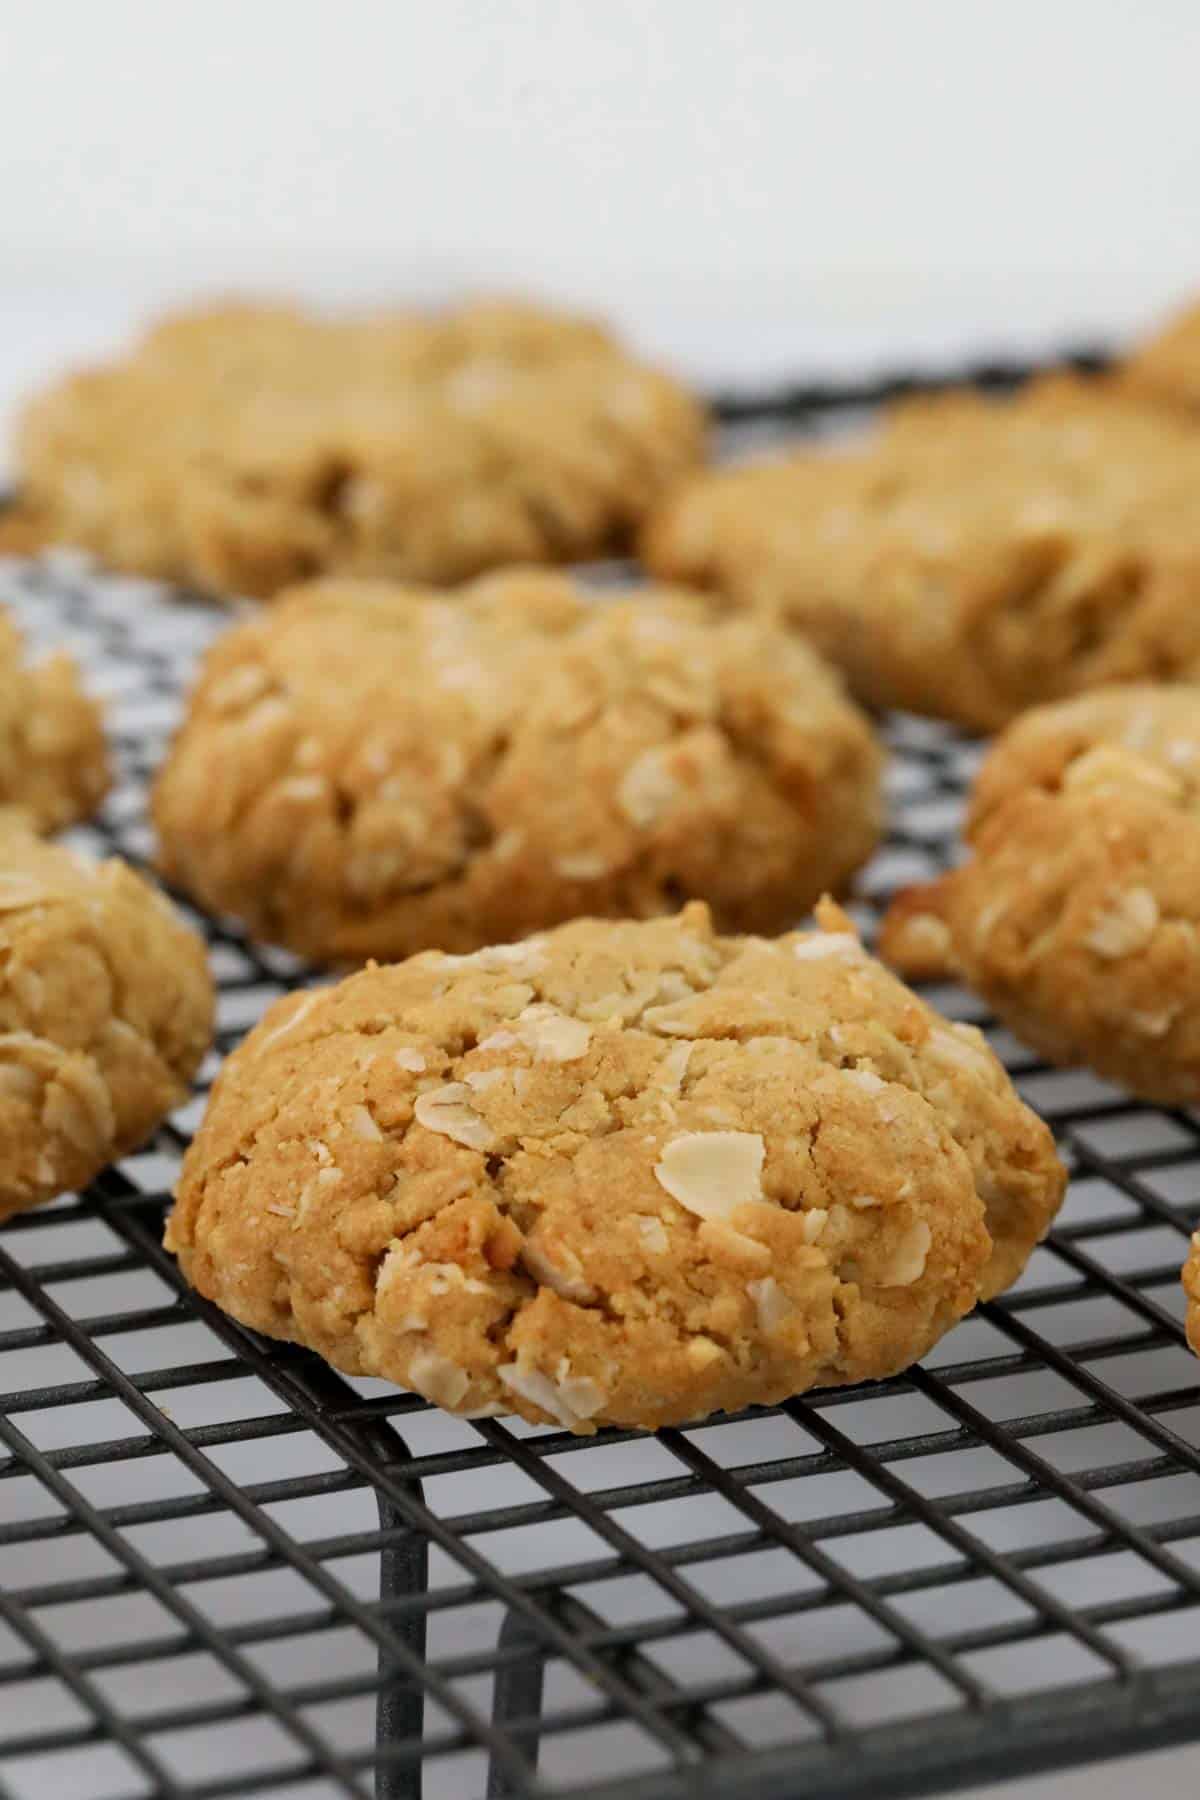 Baked ANZAC biscuits on a wire cooling tray.